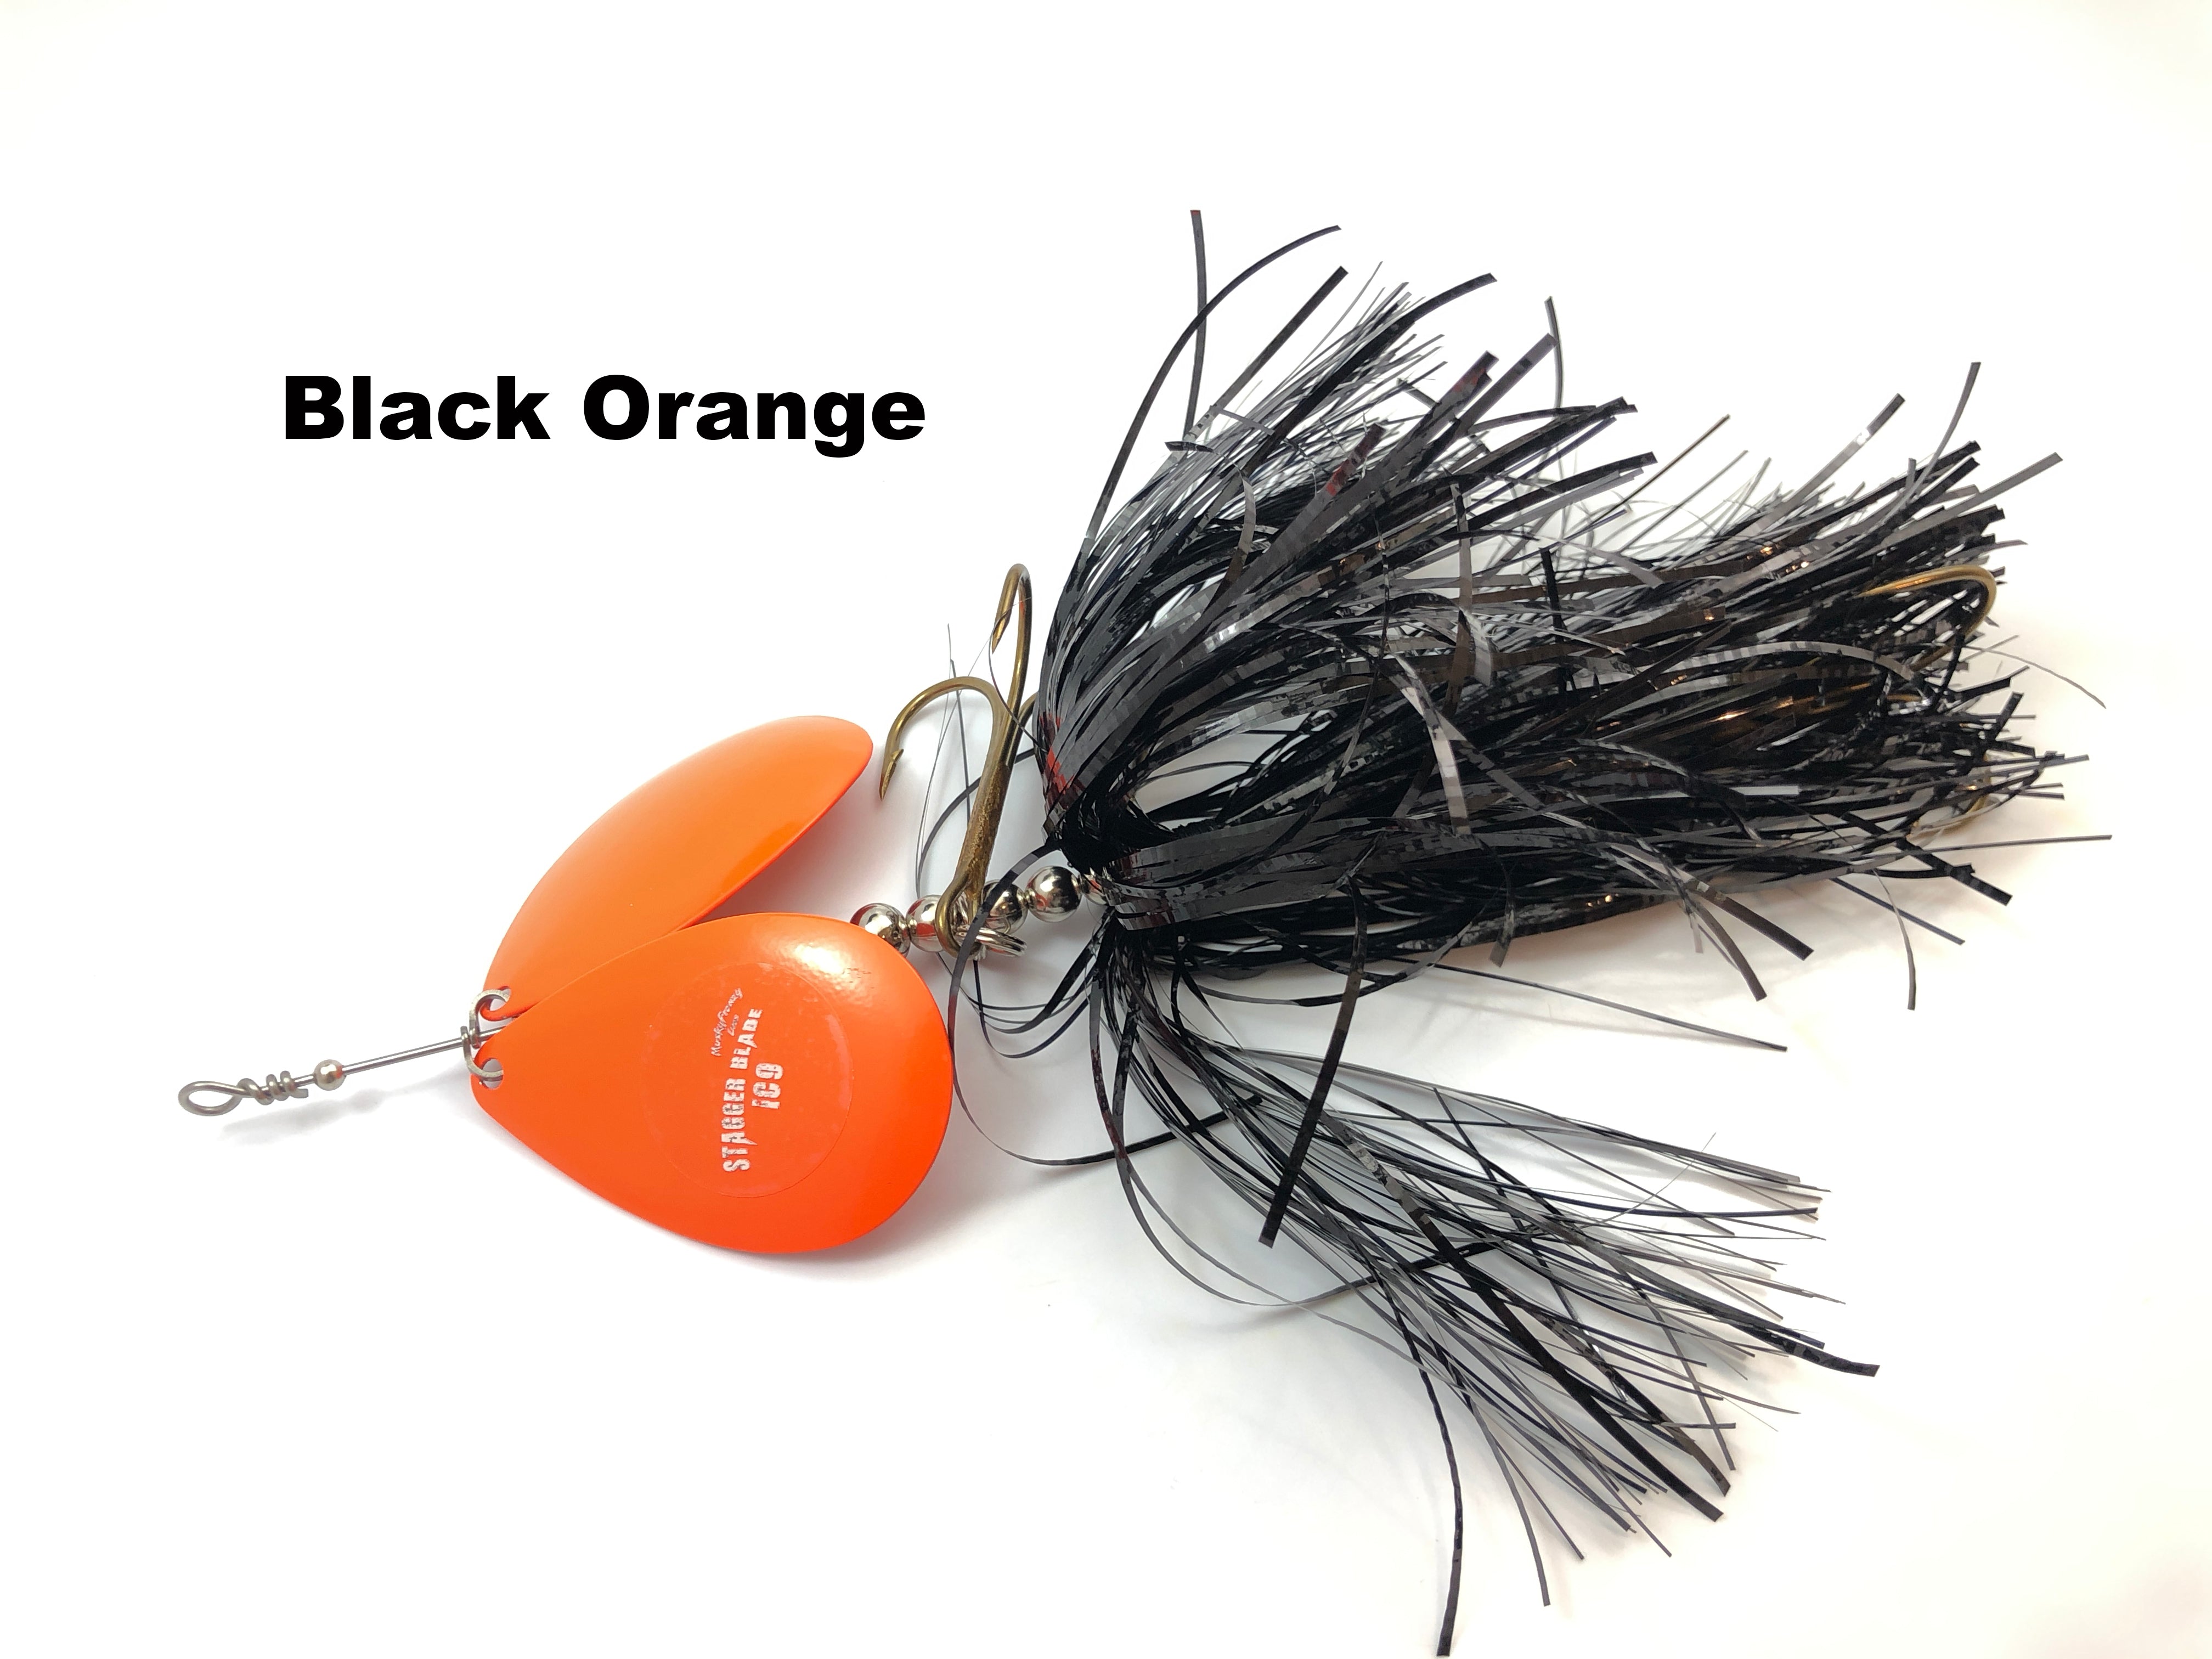 Bucktails – tagged Stagger Blade Musky Lure – Team Rhino Outdoors LLC